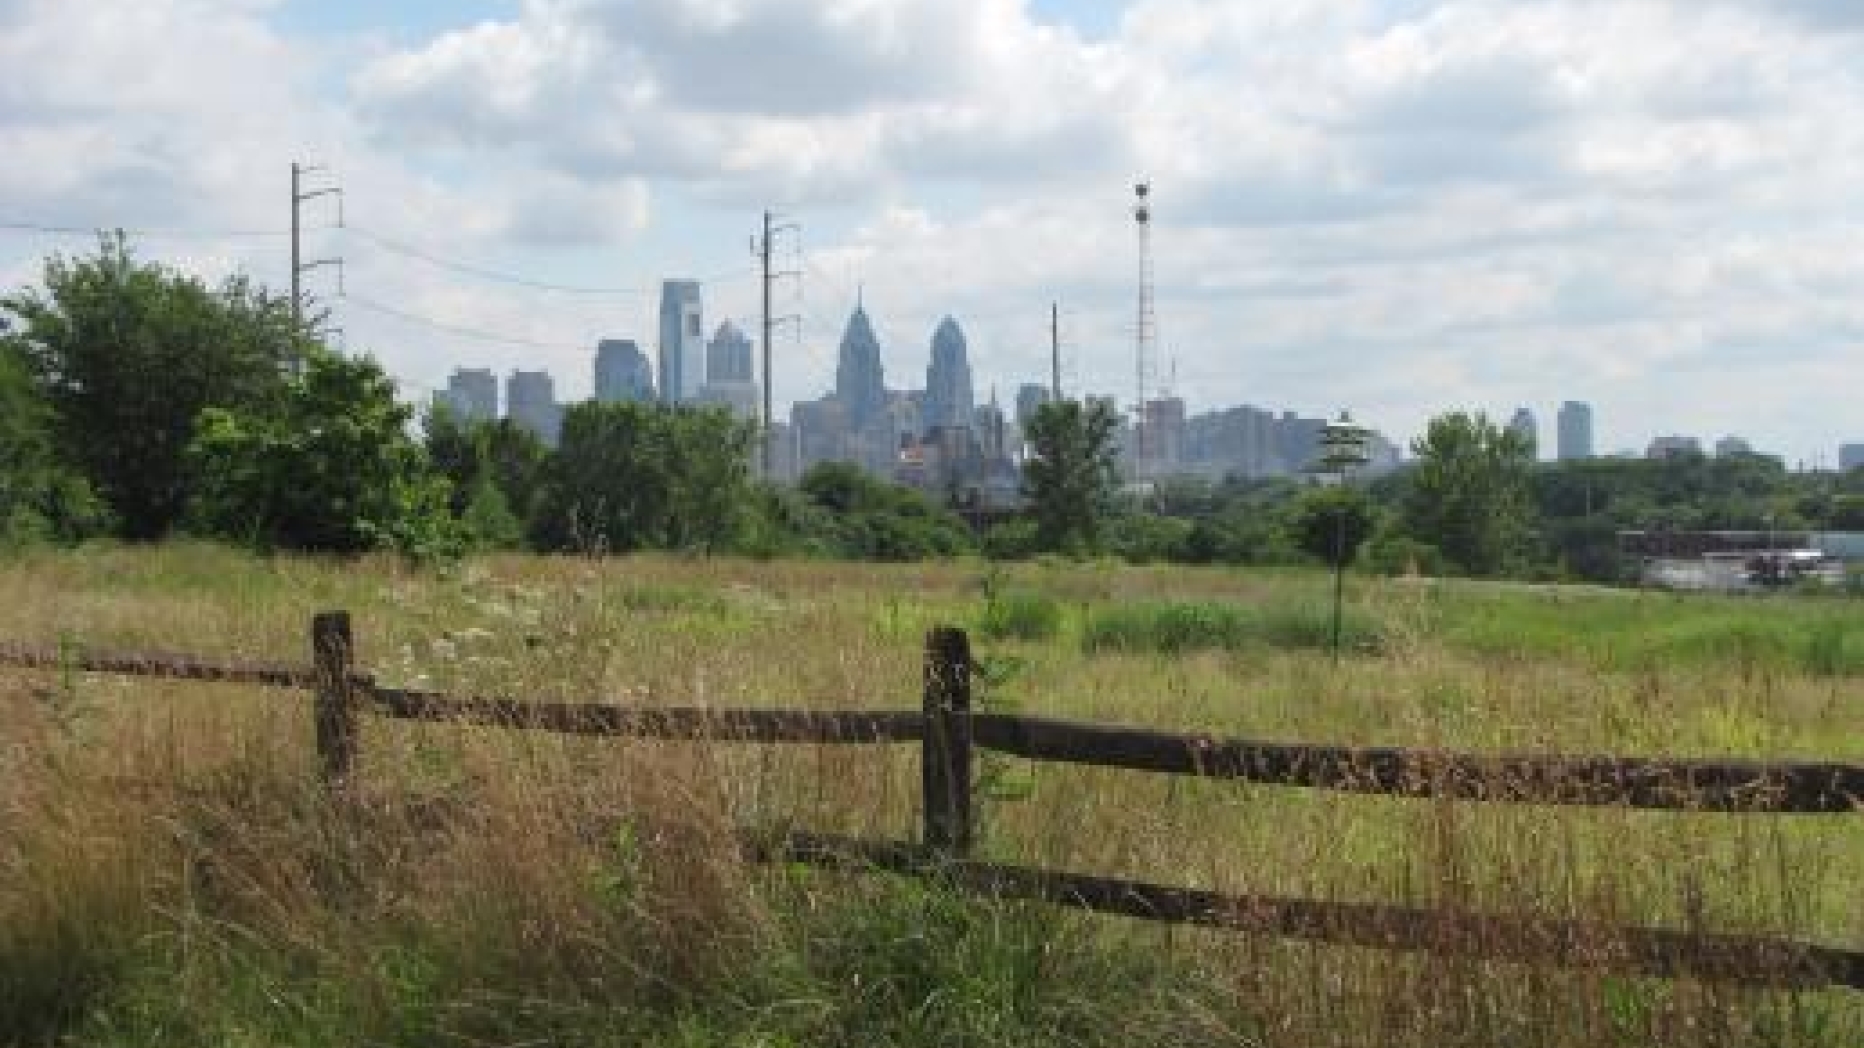 A fenced in field along a dirt road with a view of Center City Philadelphia in the background.